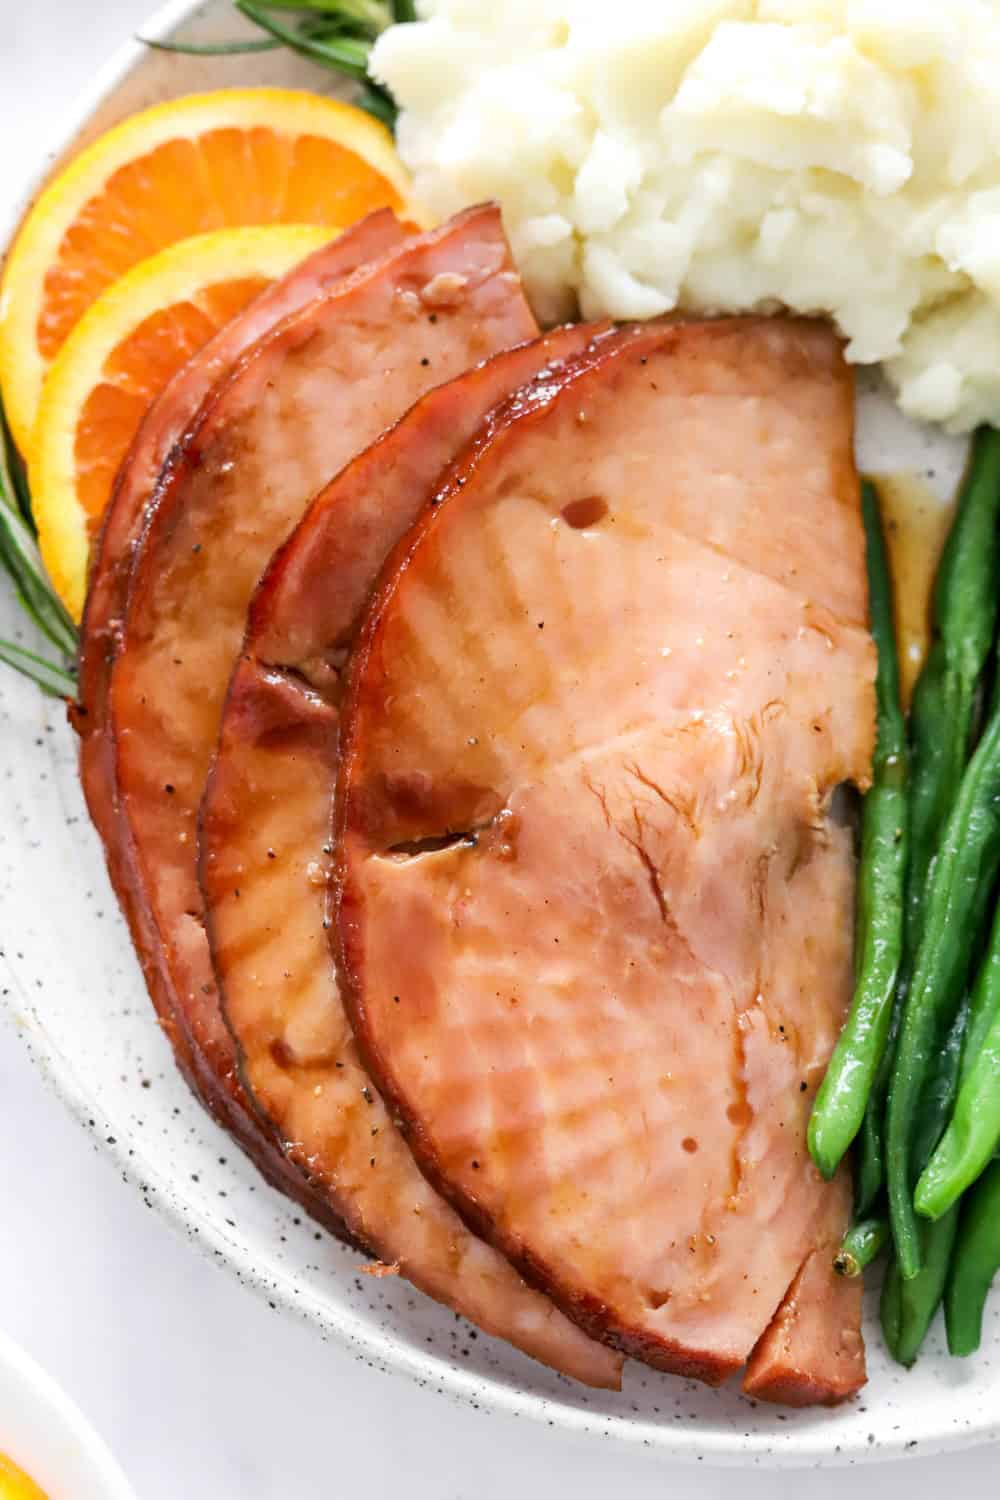 4 slices of glazed ham on plate with green beans and mashed potatoes around it with a few orange slices under it. 